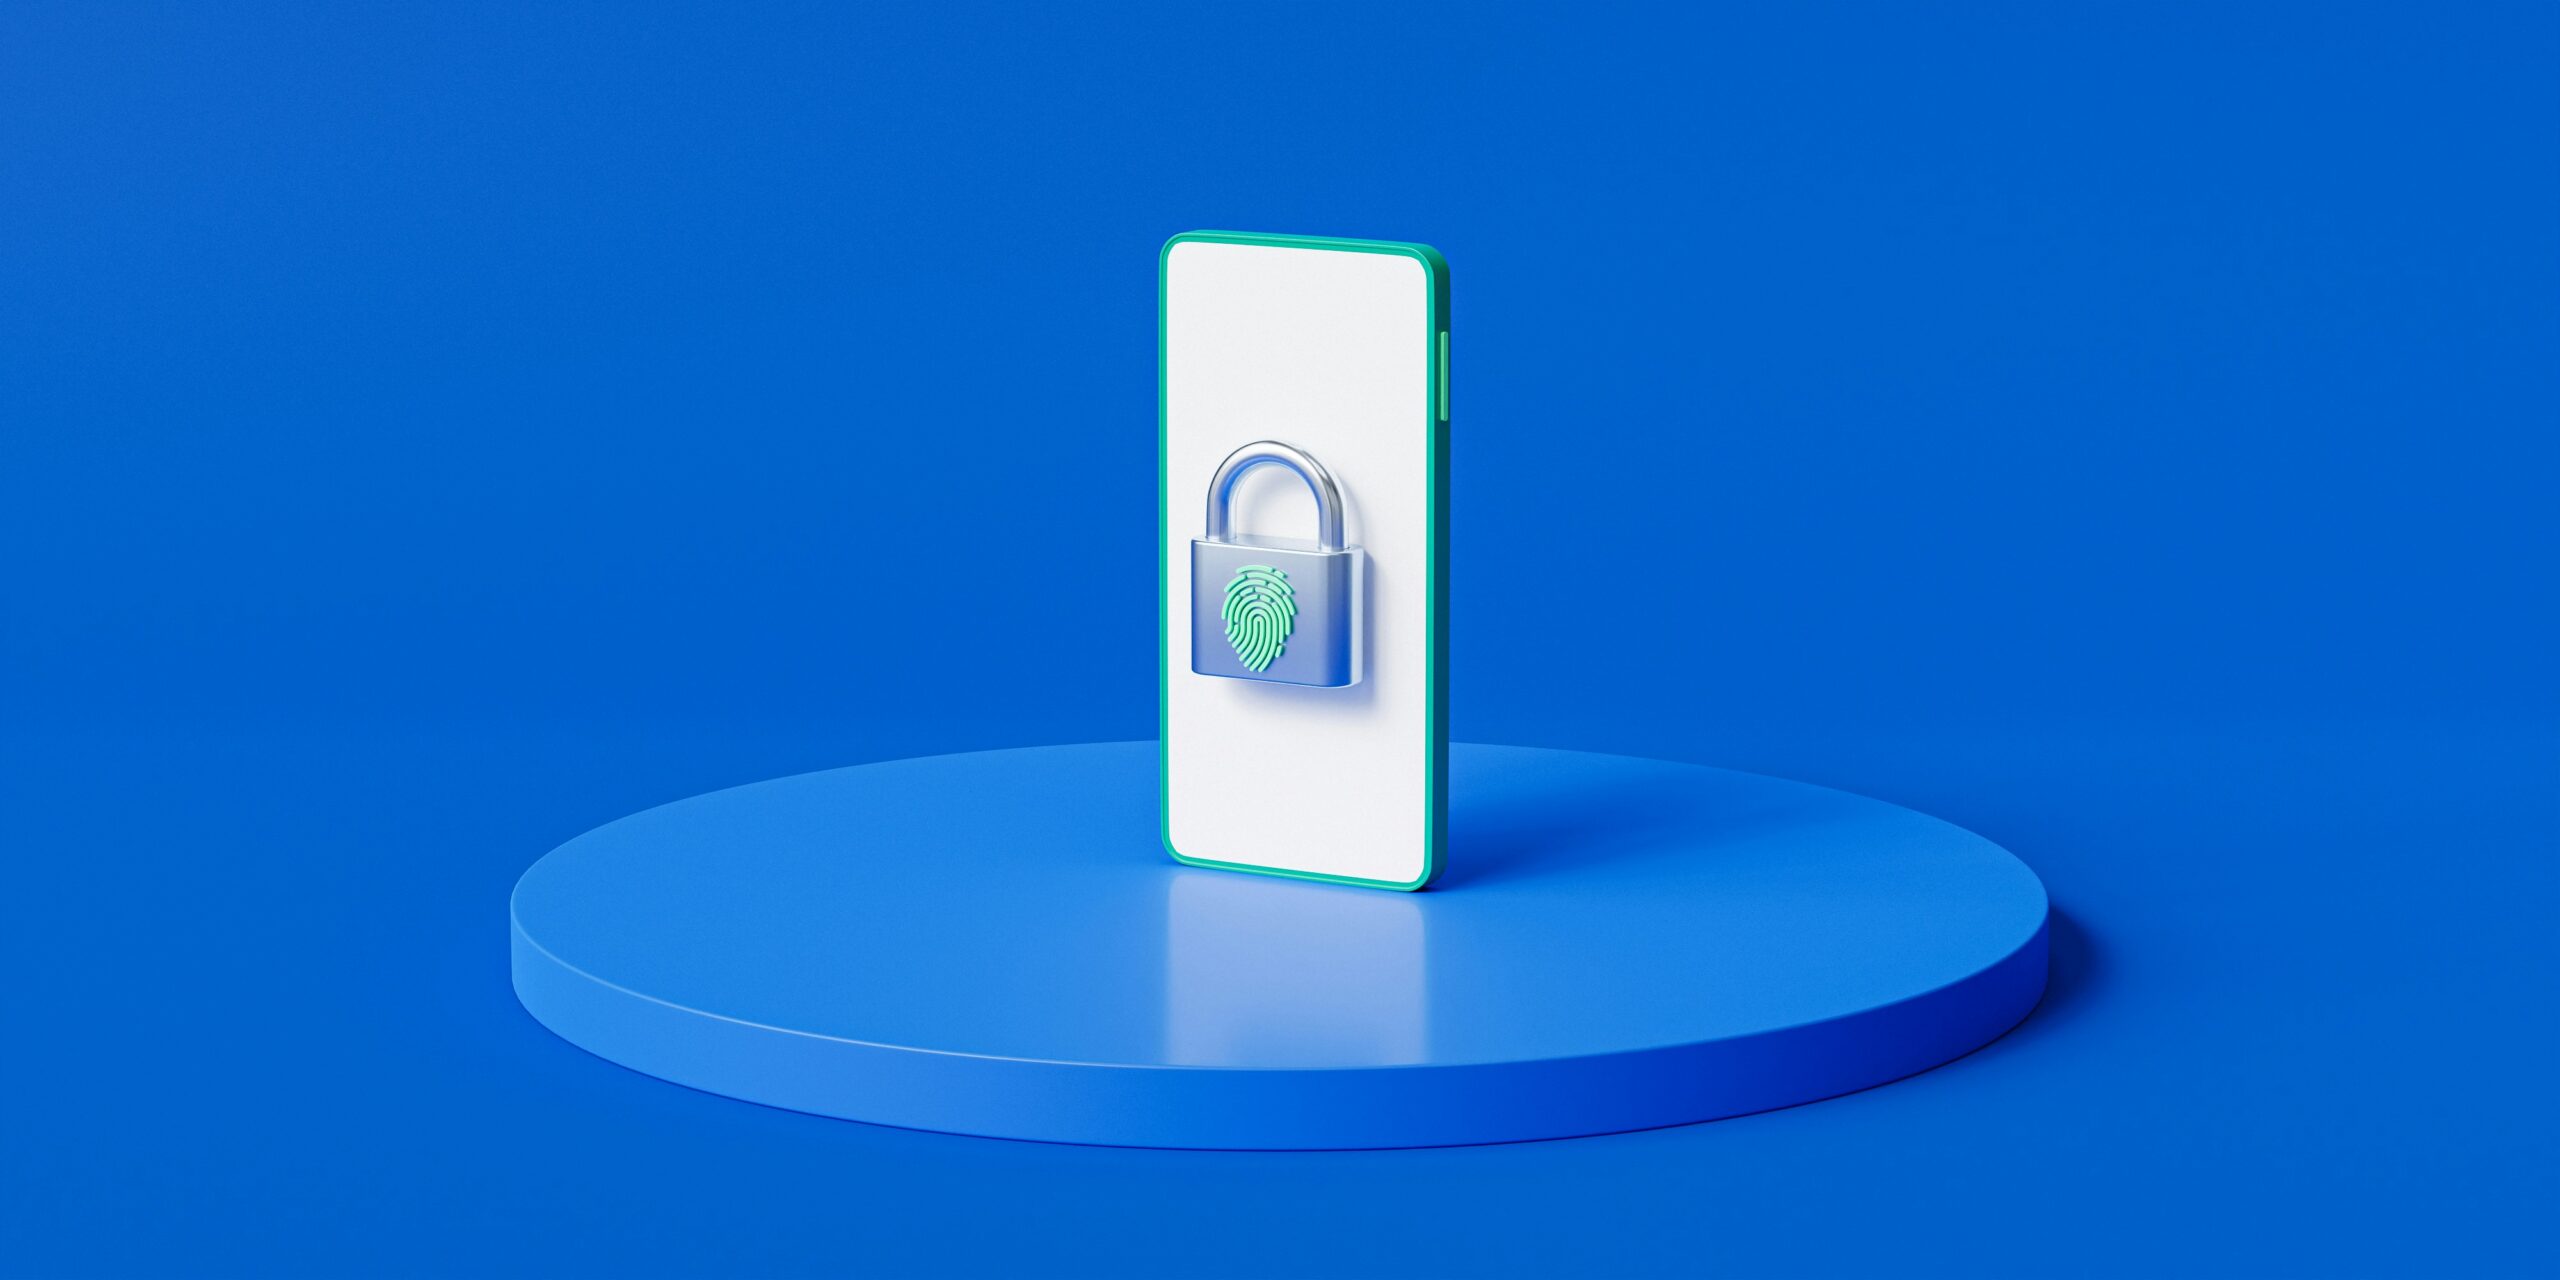 Smartphone with a digital lock icon on its screen, placed on a circular blue podium against a solid blue background with text about MSP in cyber security.